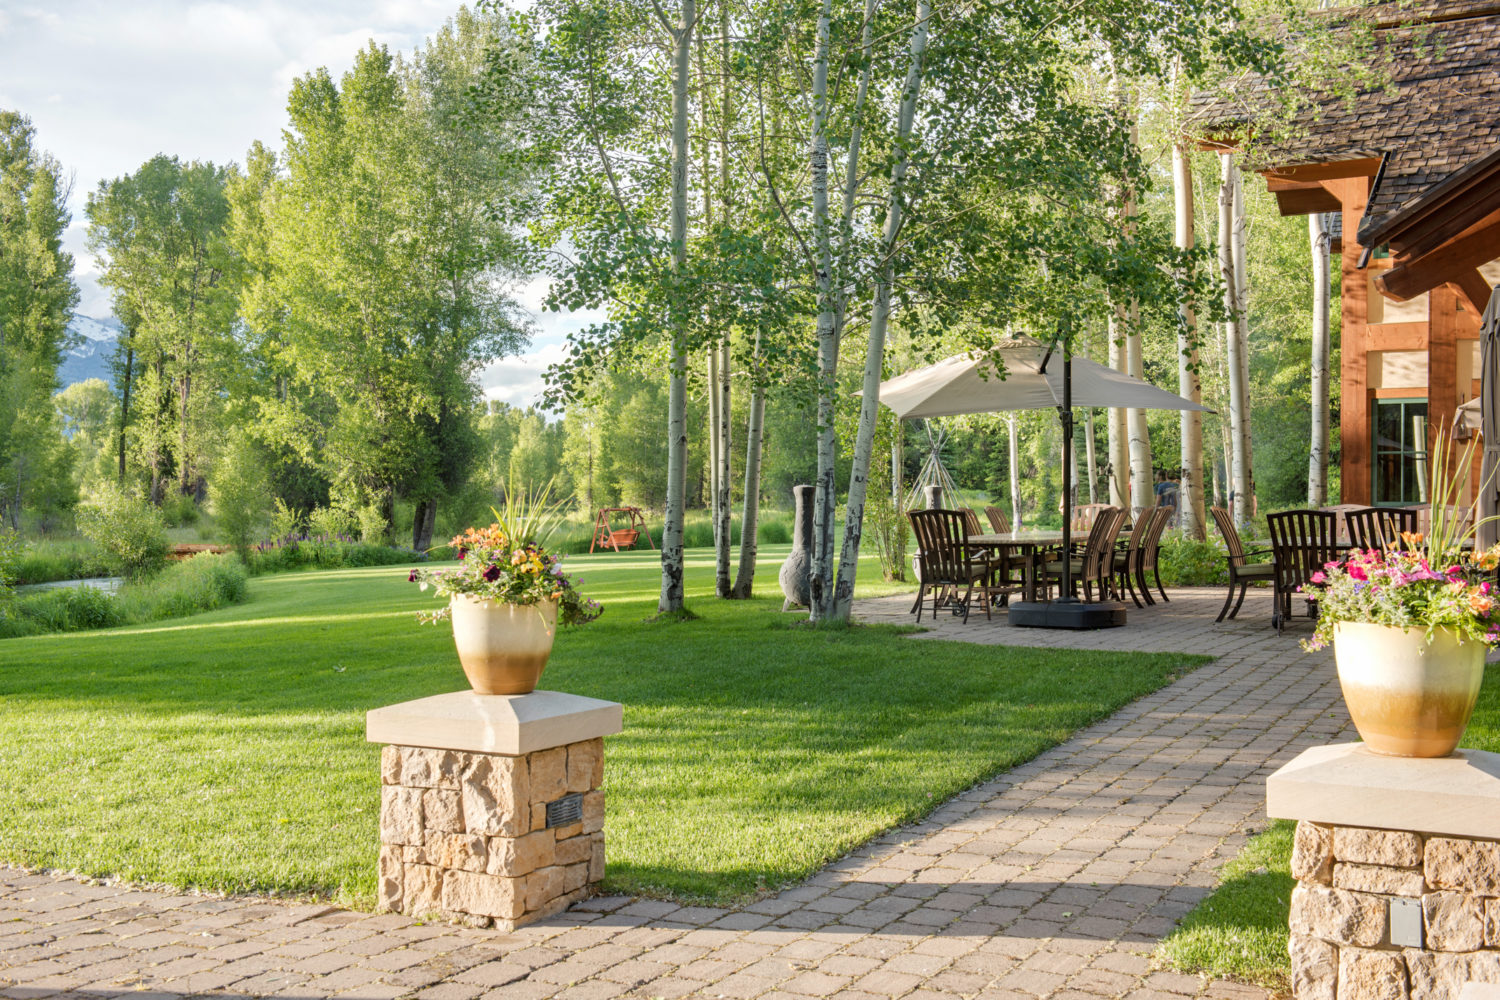 A paved path with flowers and a lawn and outdoor dining area